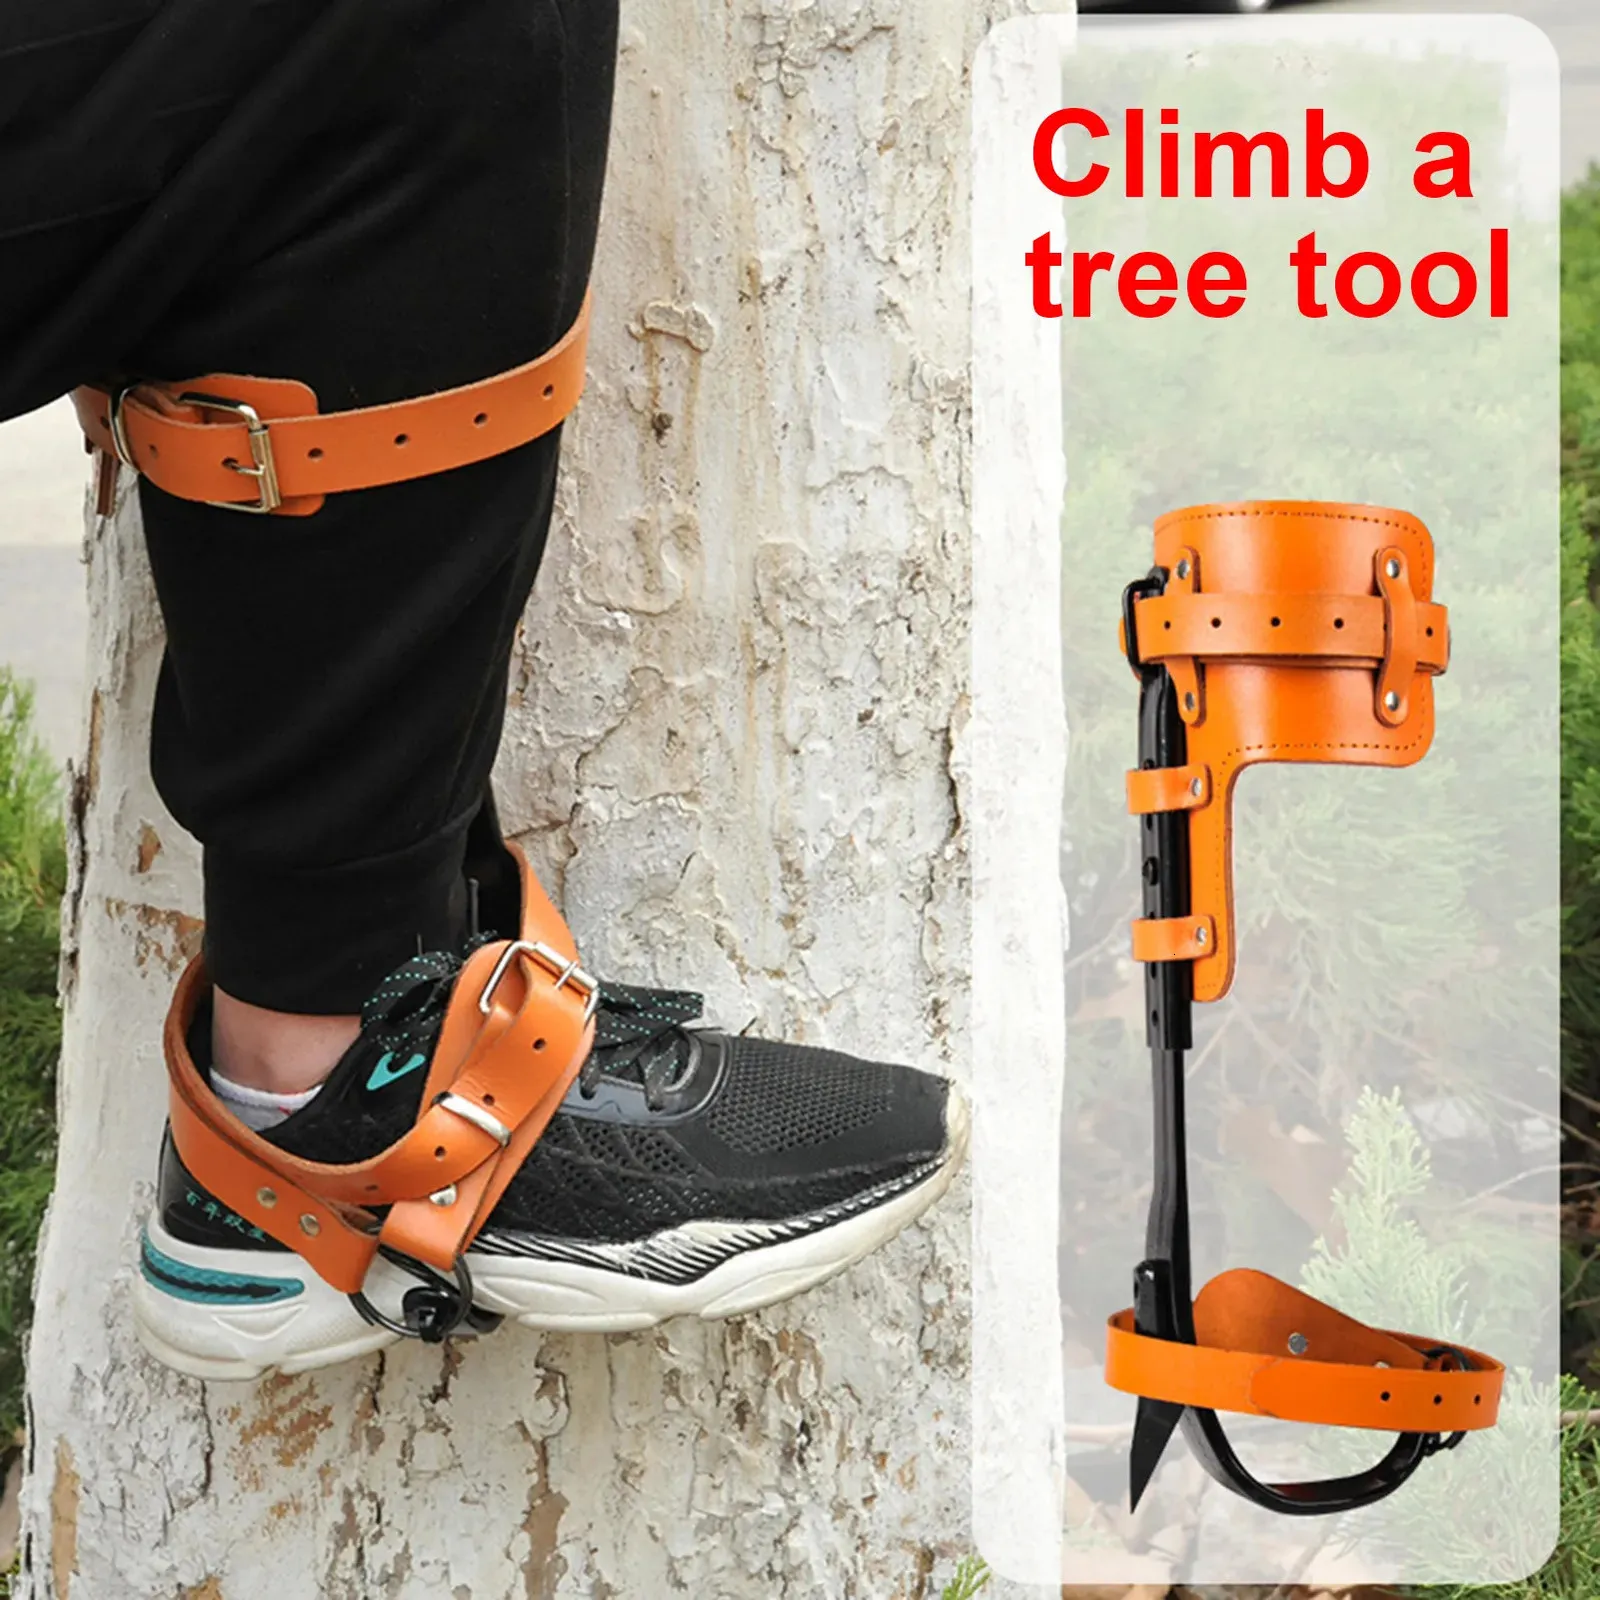 Thickened Tree Tree Climbing Saddle With Non Skid Pedal Spikes